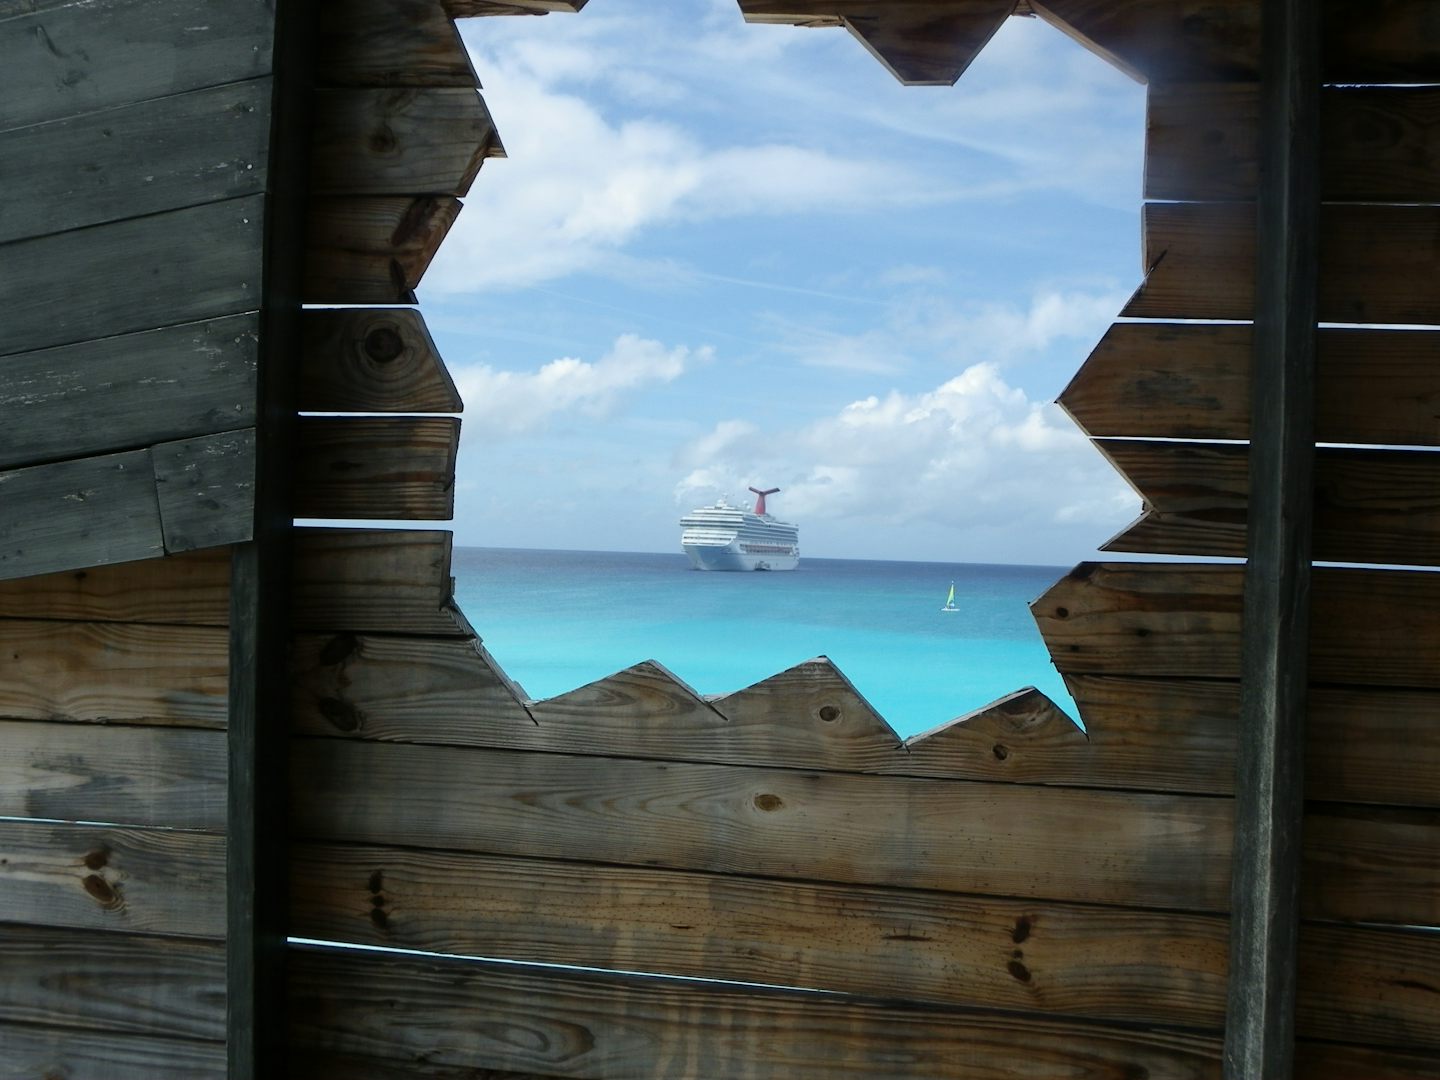 This is a pix of the Conquest taken from the window of an old bar in the Bahamas.